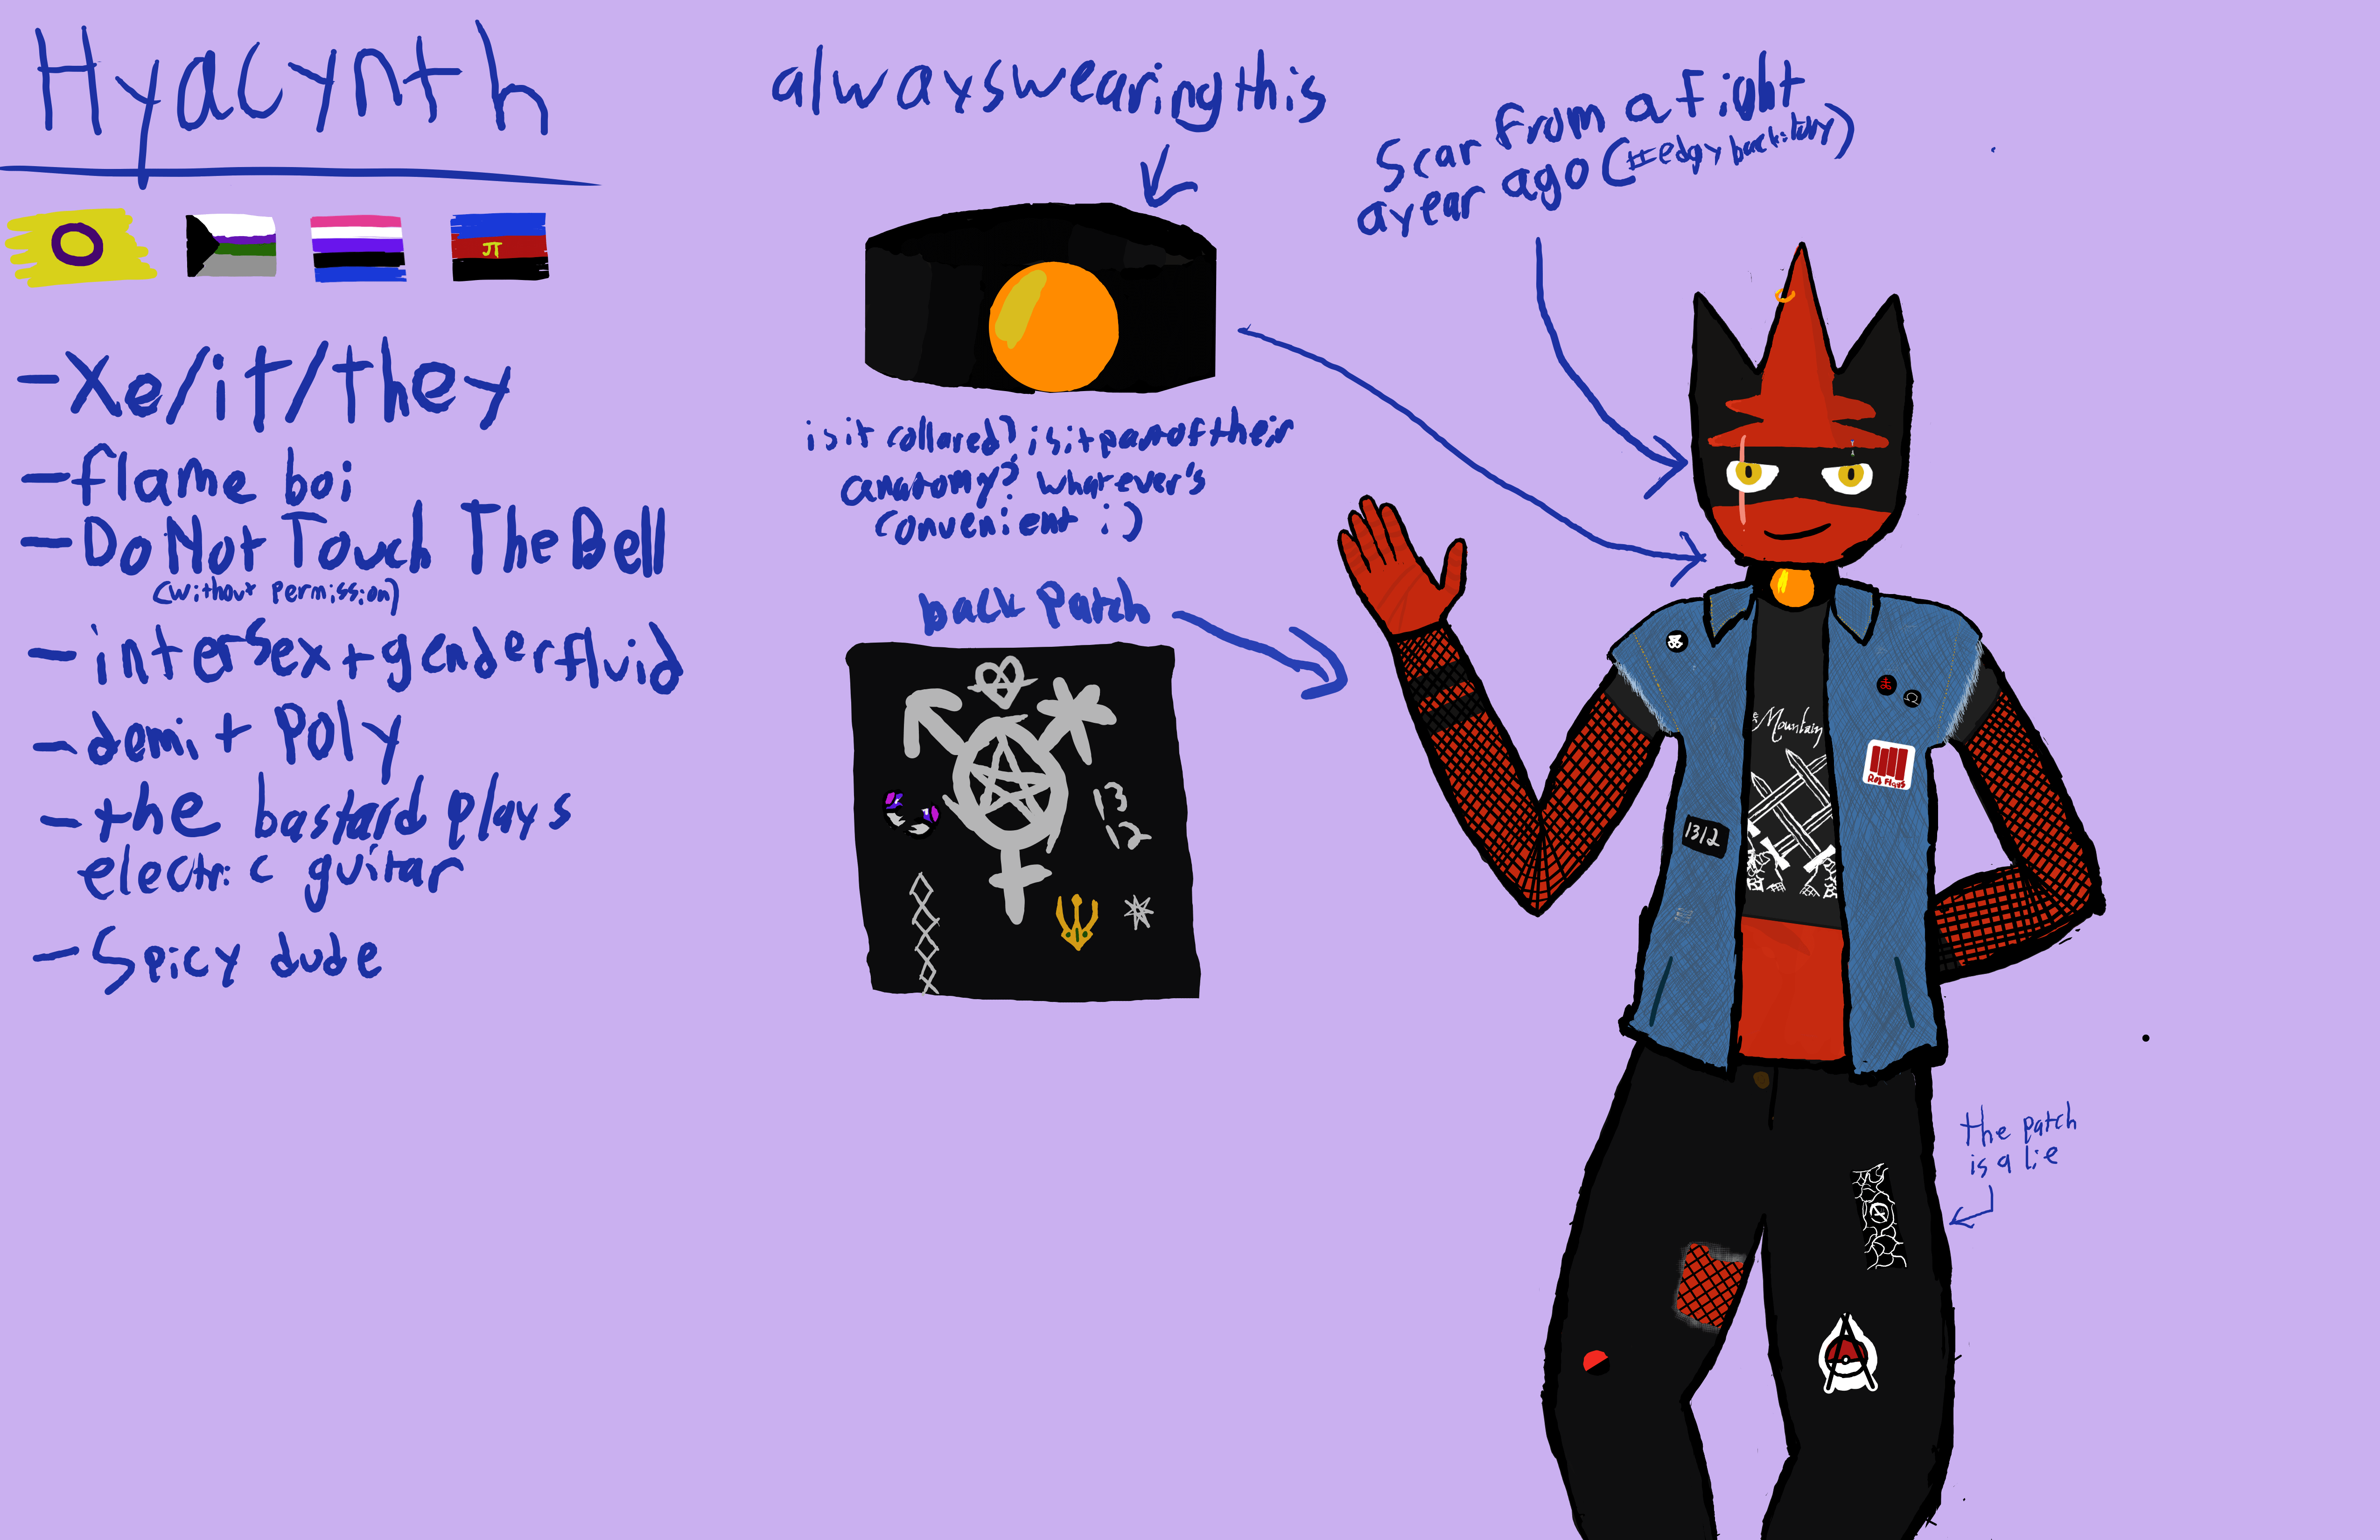 an anthro torracat, hyacinth, wearing a patch vest and pants, and a black crop top with crossed swords. xe also wears fishnet sleeves. it has a scar on its right eye, and its left eyebrow has a piercing. on the right, there are some notes as to their character, and some pride flags. notes are - xe/it/they - flame boi - Do Not Touch The Bell (without permission) - intersex and genderfluid - demi and poly - the bastard plays electric guitar - spicy dude. the flags are the intersex, demiromantic and demisexual, genderfluid, and polyamorous flags. between the notes and Hyacinth are some details, including their collar and back patch.